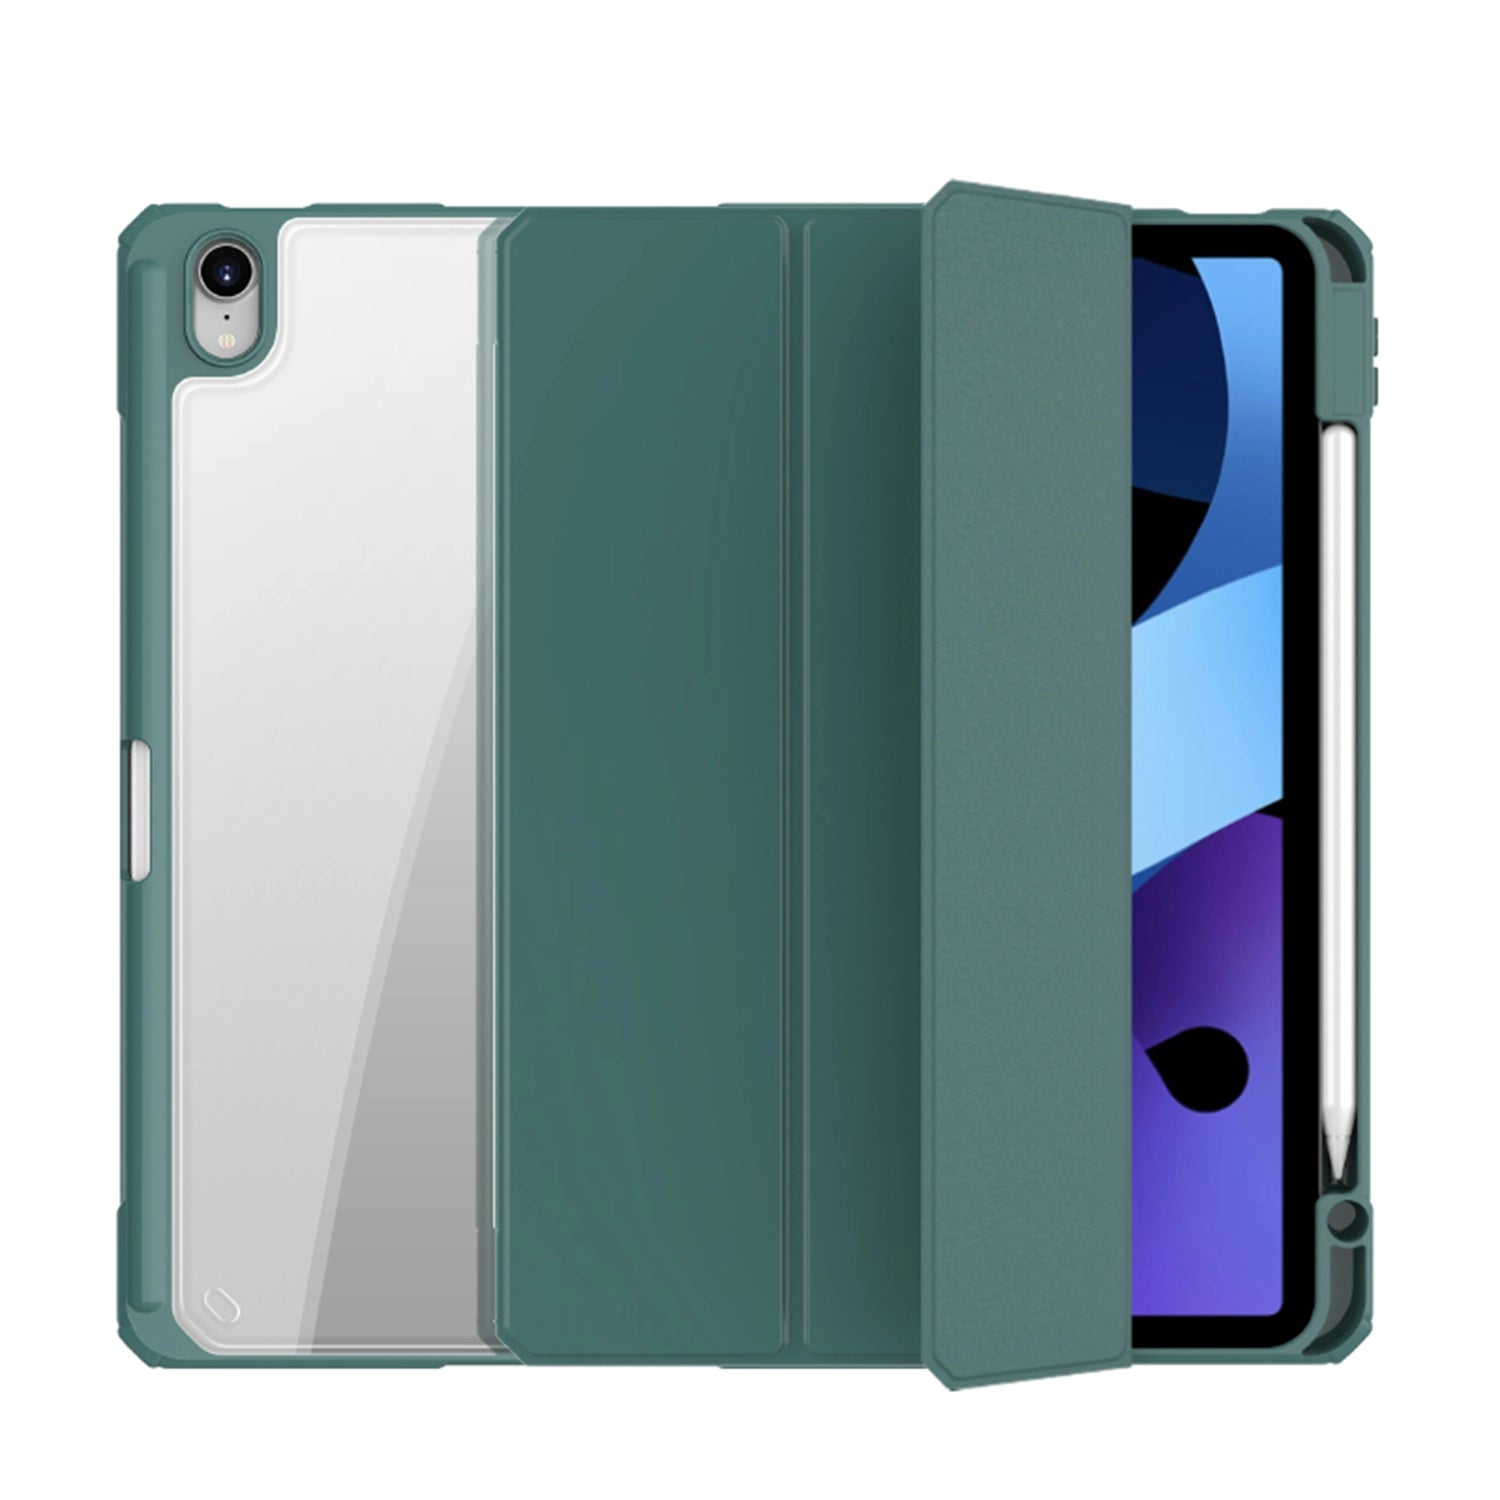 Mutural Pinyue Series Folio Case with Pencil Holder for iPad 9.7"/ 9th Gen 10.2 "/ Pro 10.5"/ Pro 11"/ Air 10.9"/ 10th Gen 10.9"/ Pro 12.9"